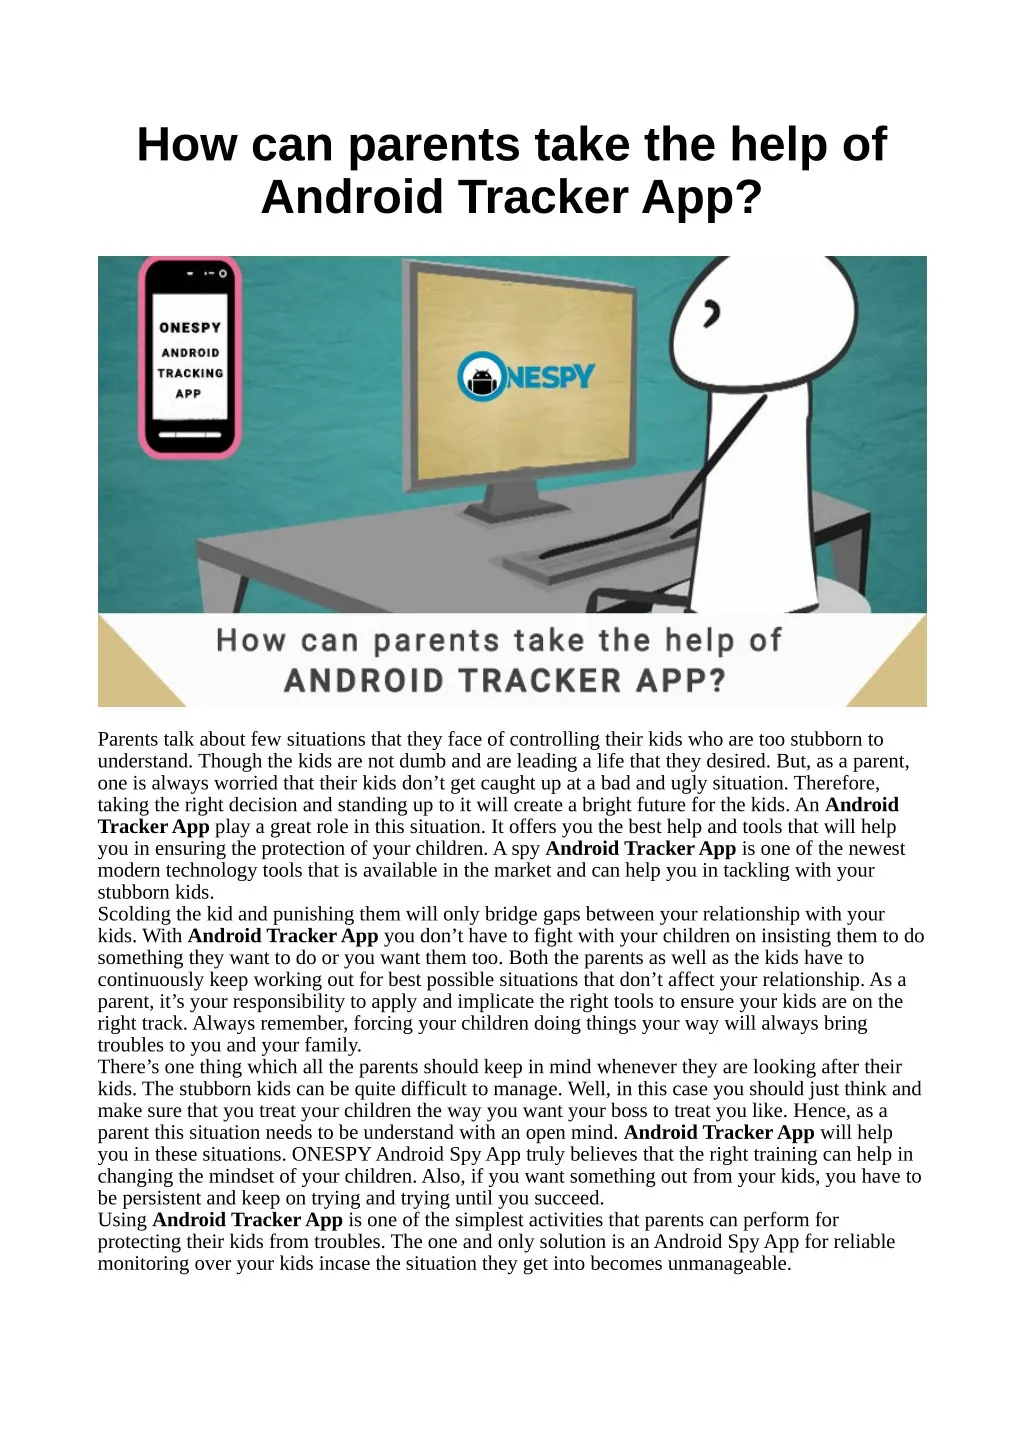 how can parents take the help of android tracker